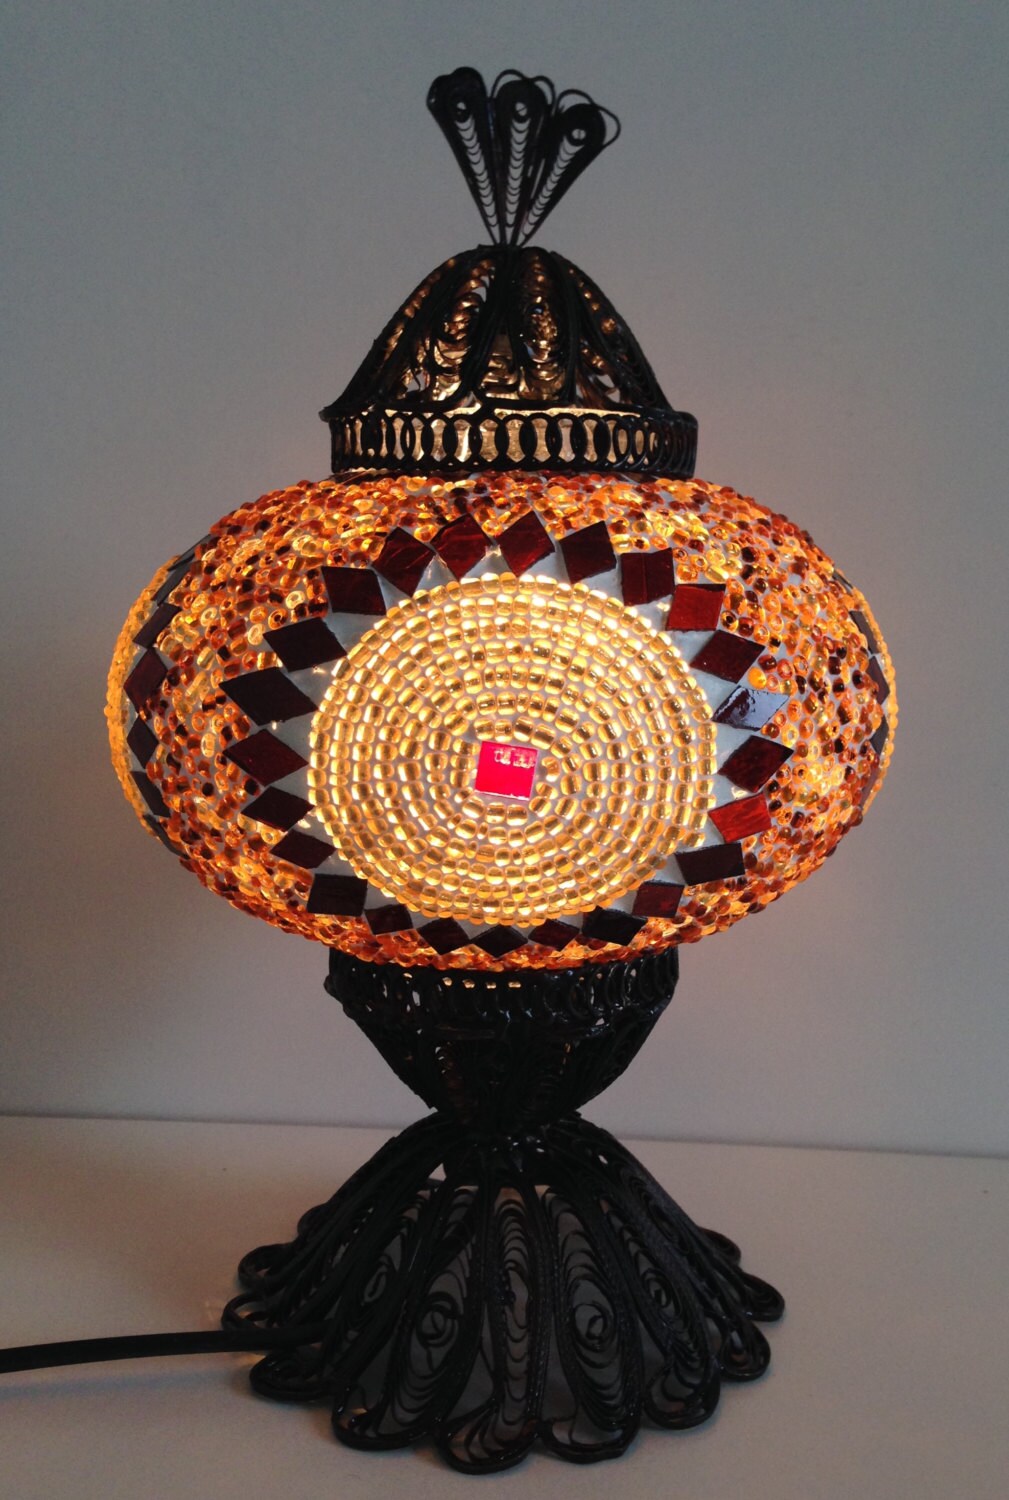 Goldenturkish Mosaic Lamp With Hand Crafted By Thelampcorner